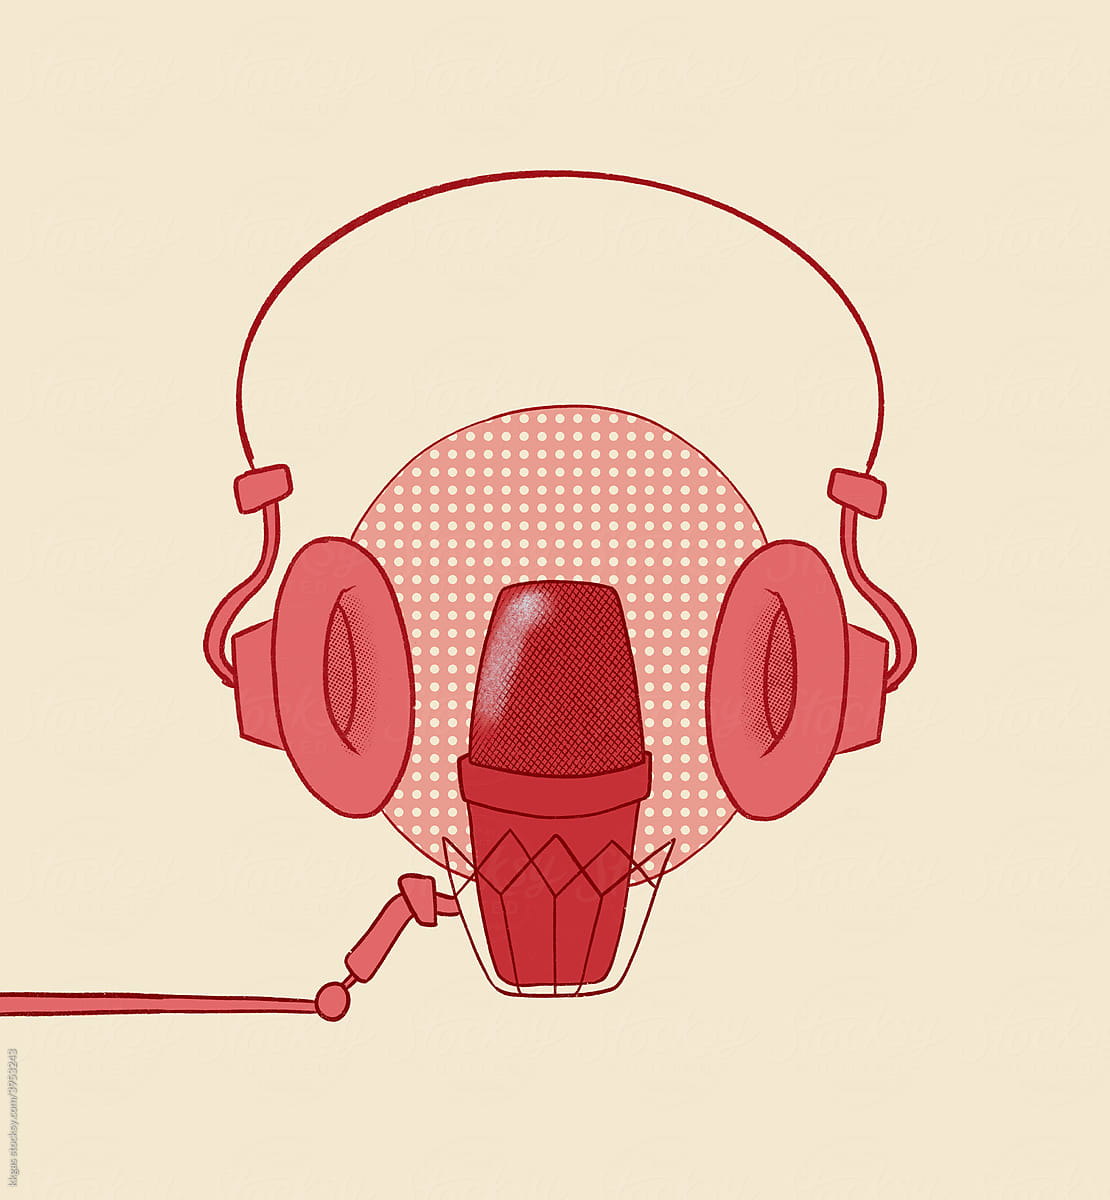 Podcasting concept in red